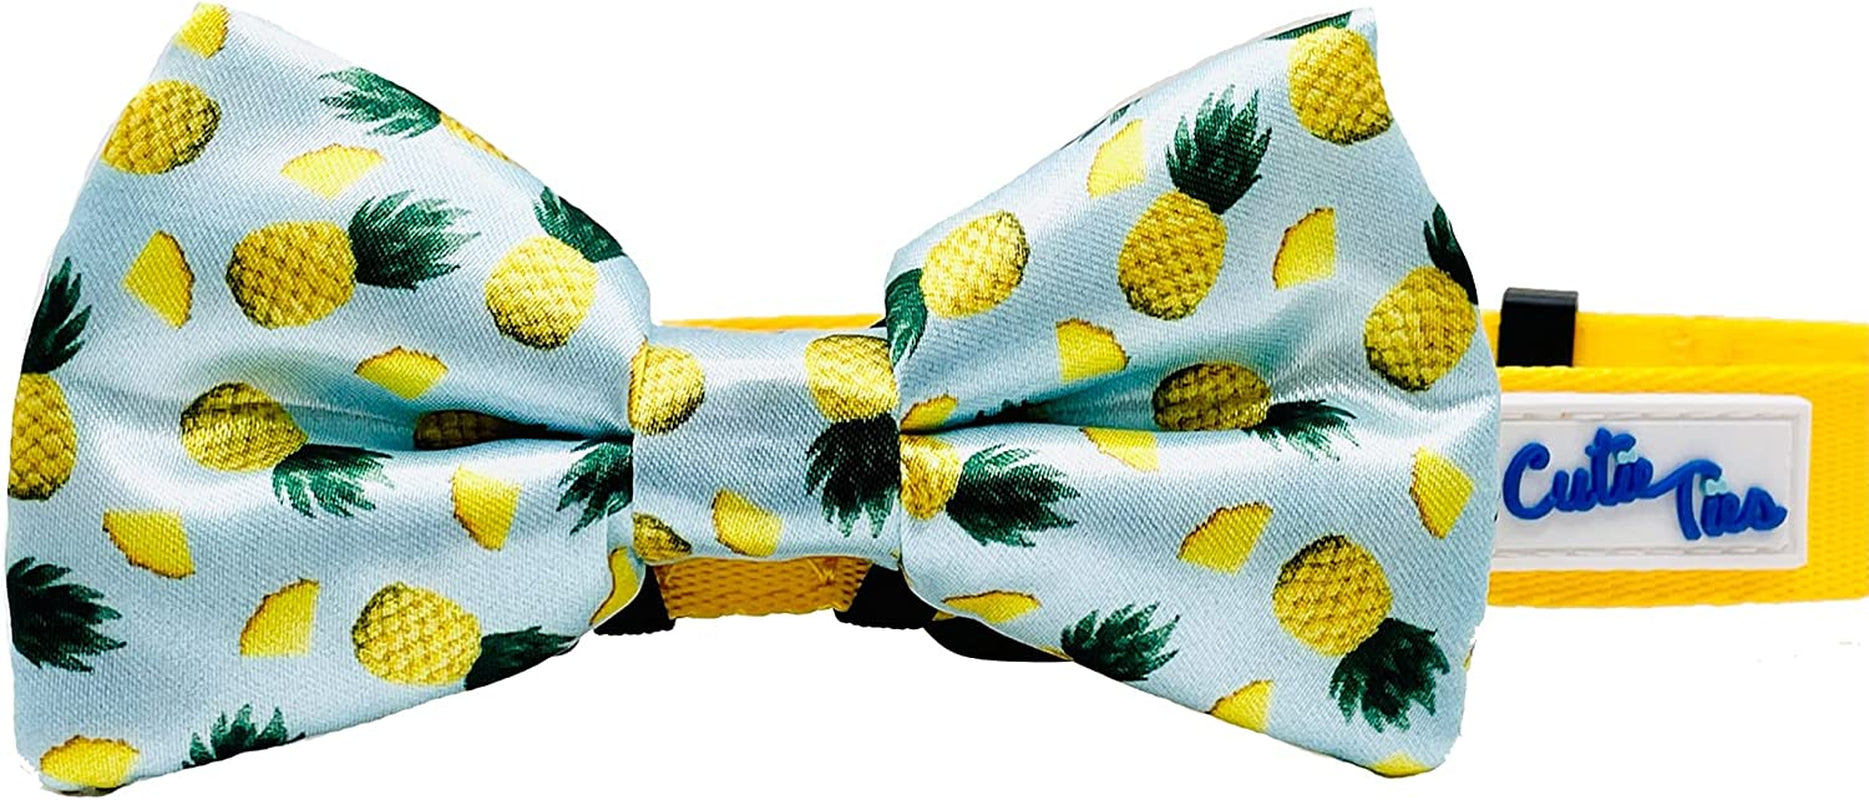 CUTIE TIES Dog Bow Tie Pizza- 2" X 4" Premium Quality Bow Ties for Dogs - Fancy Dog Tie with Slip over Elastic Bands - Cute Dog Tie Fits Most Collars - Dog Tie for Small, Medium and Large Breeds Animals & Pet Supplies > Pet Supplies > Dog Supplies > Dog Apparel Cutie Ties Pineapple  